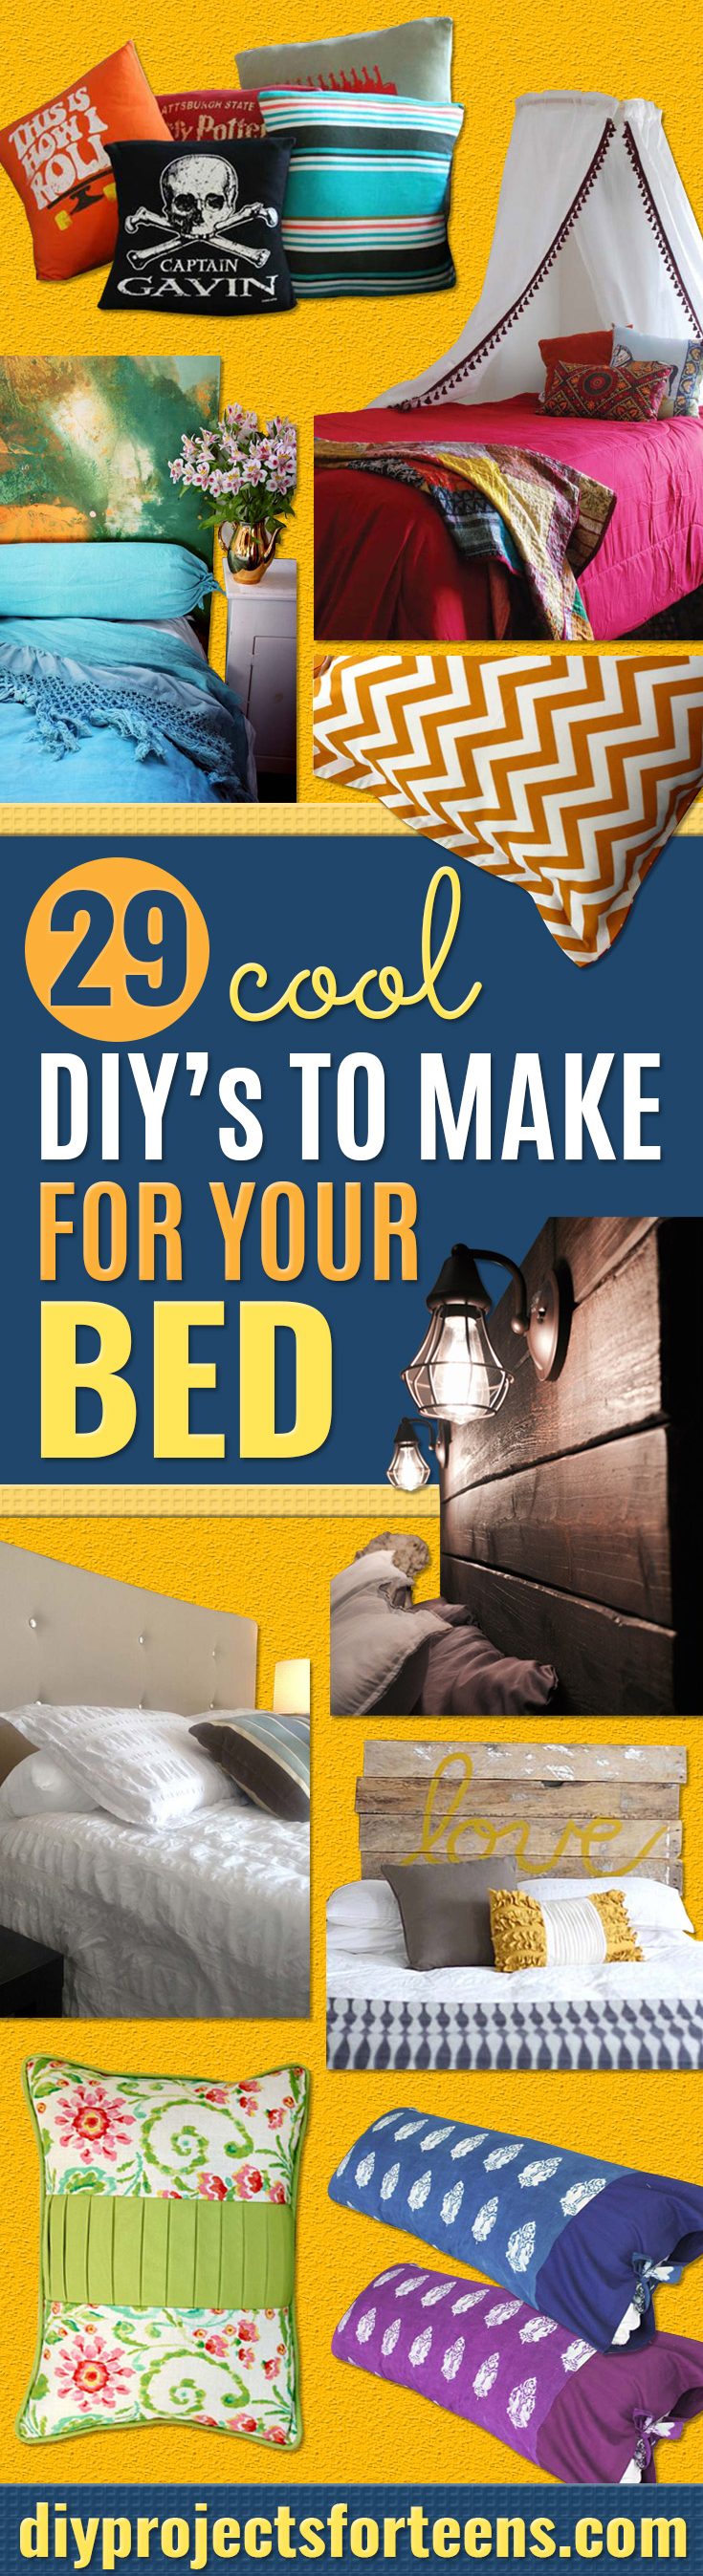 Cool DIY Ideas for Your Bed - Fun No Sew Bedding, Pillows, Blankets, Sewing Projects for Home Decor and Crafts to Make Your Bedroom Awesome - Easy Step by Step Tutorials for Making A T-Shirt Pillow, Knit Throws, Fuzzy and Furry Warm Blankets and Handmade DYI Bedding, Sheets, Bedskirts and Shams 